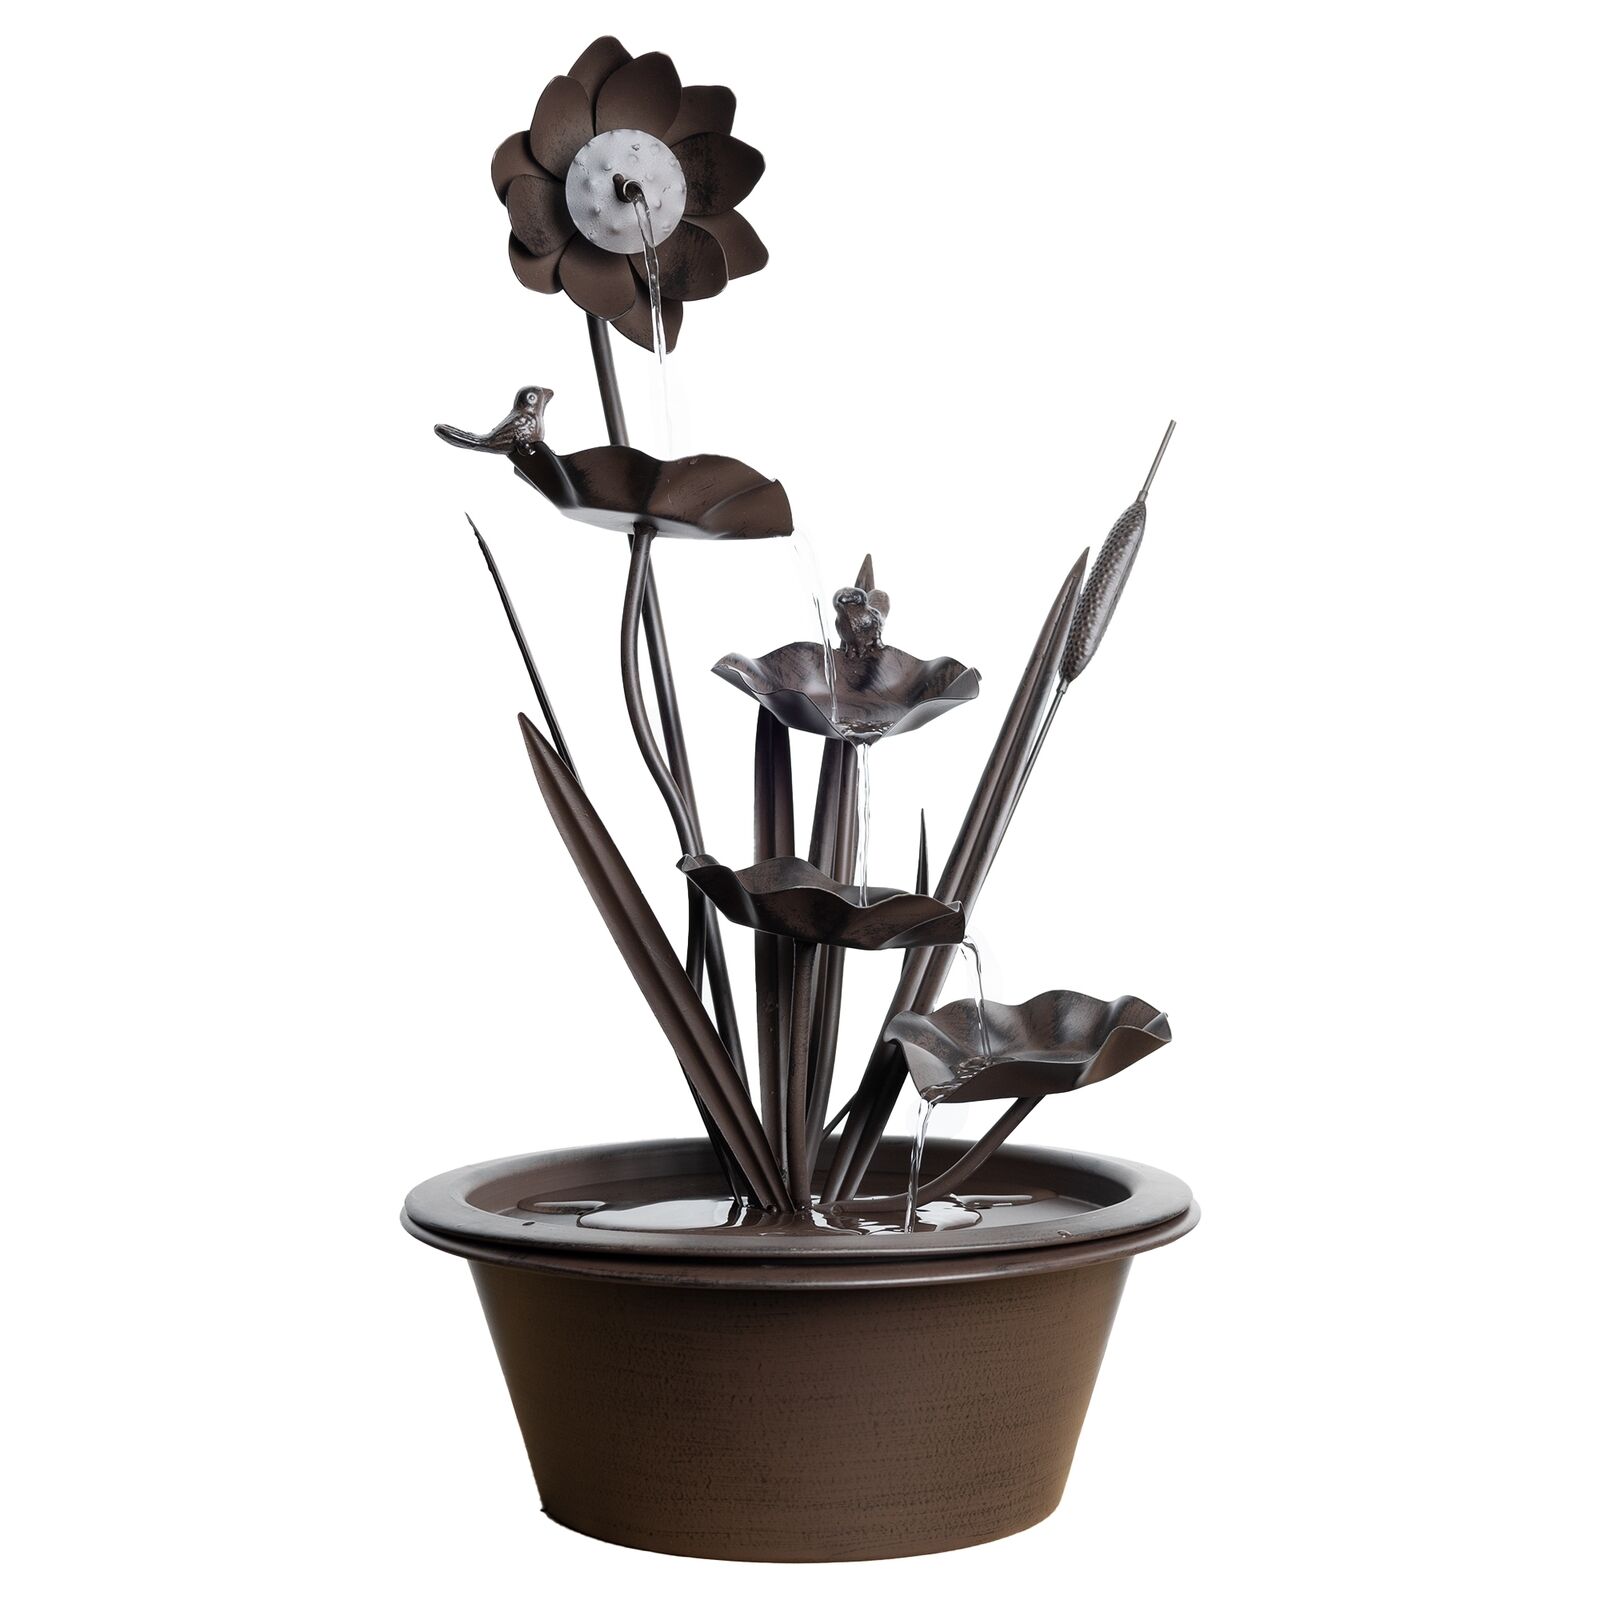 Melrose Brushed Metal Floral Fountain with Bird Accents 24